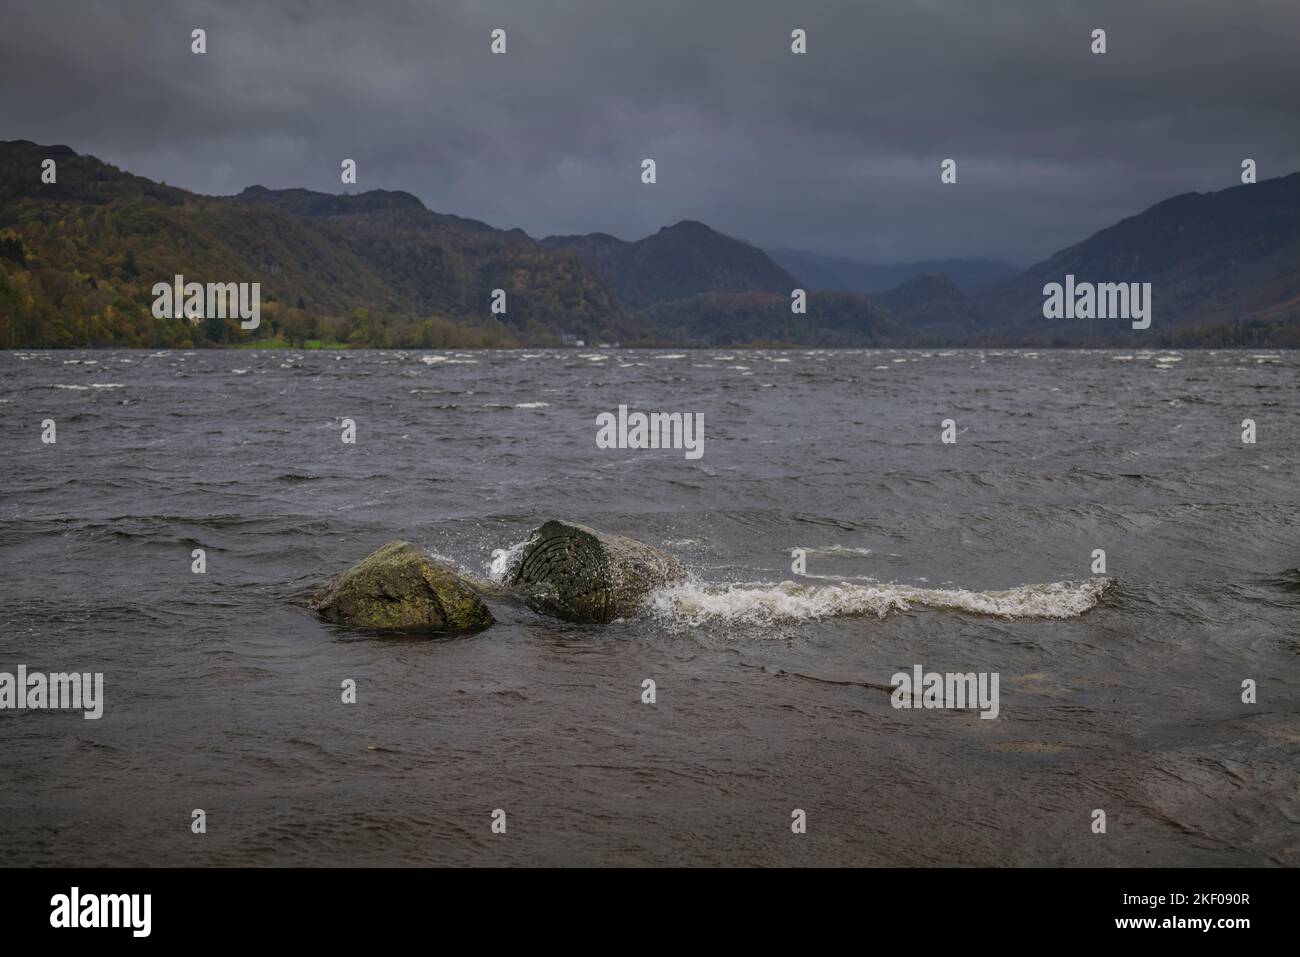 Centenary Stones carving at Calfclose Bay, Derwentwater, English Lake District. The carving celebrates the National Trust's centenary. Stock Photo